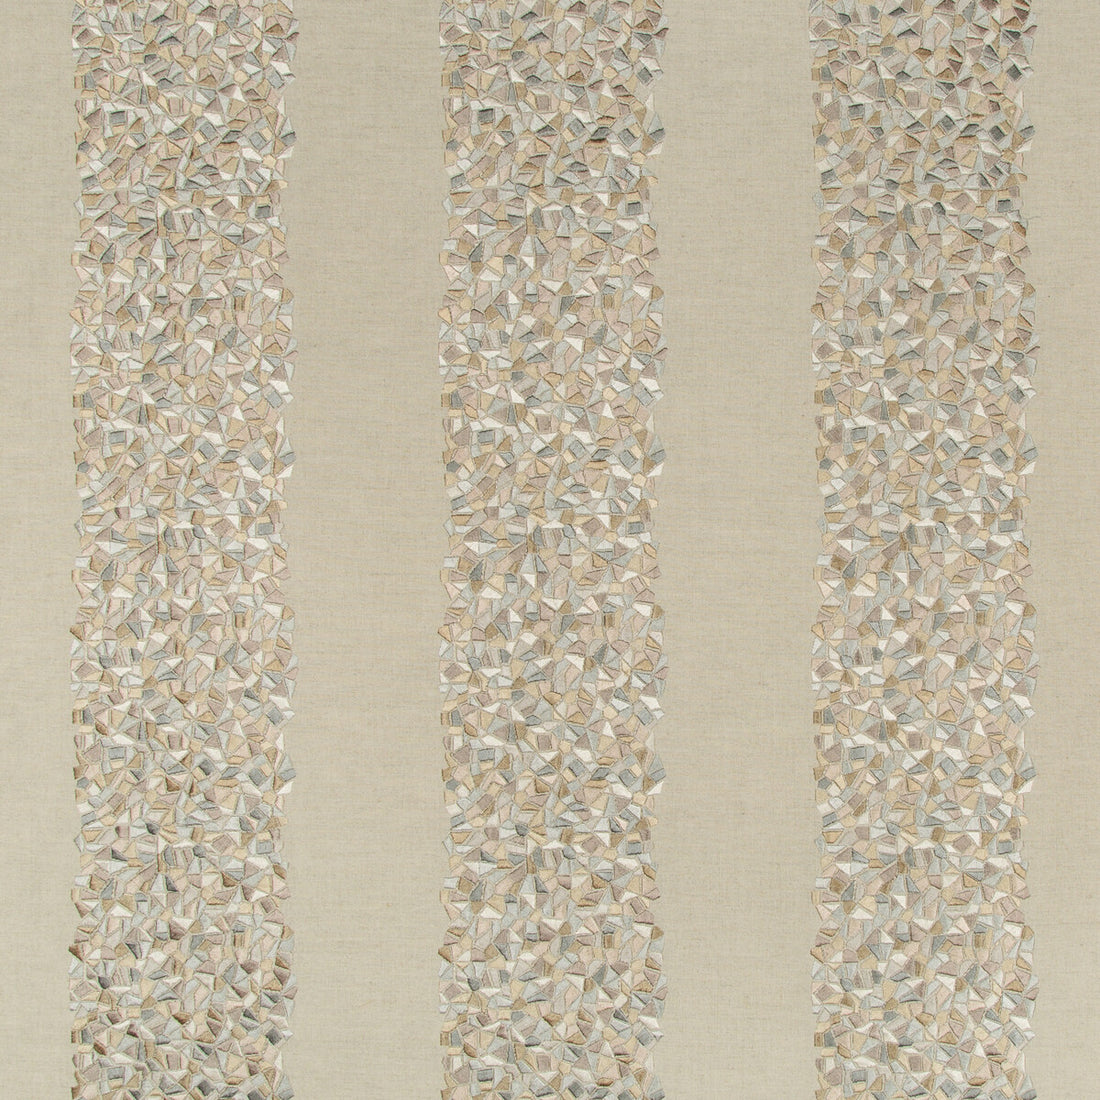 Sagano fabric in quartz color - pattern 4619.16.0 - by Kravet Couture in the Izu Collection collection